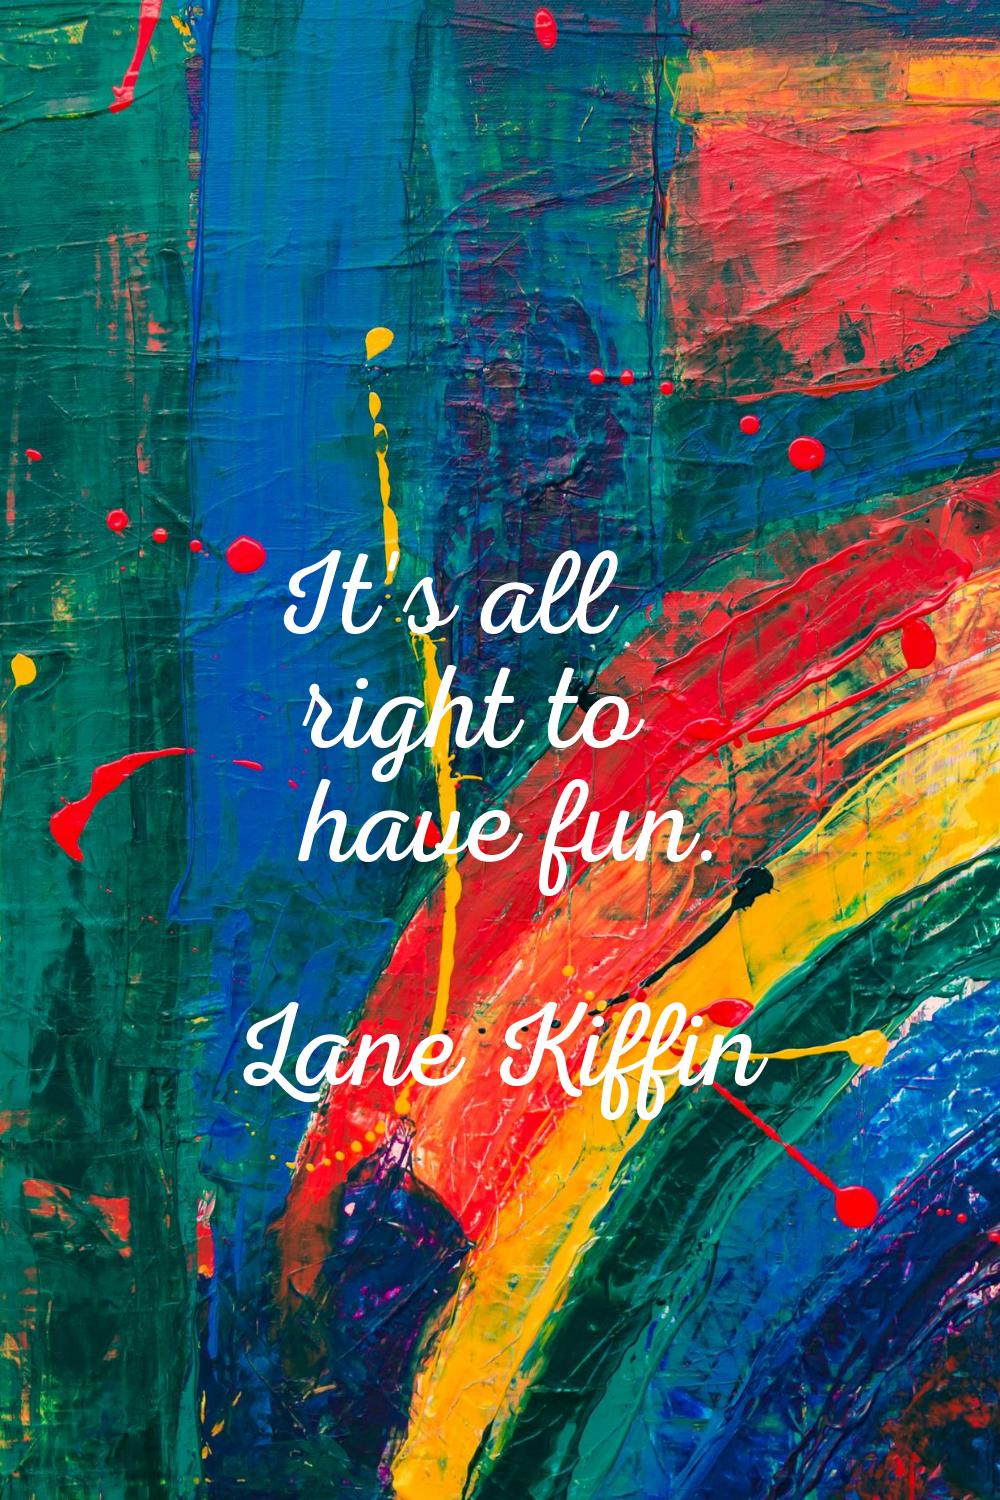 It's all right to have fun.